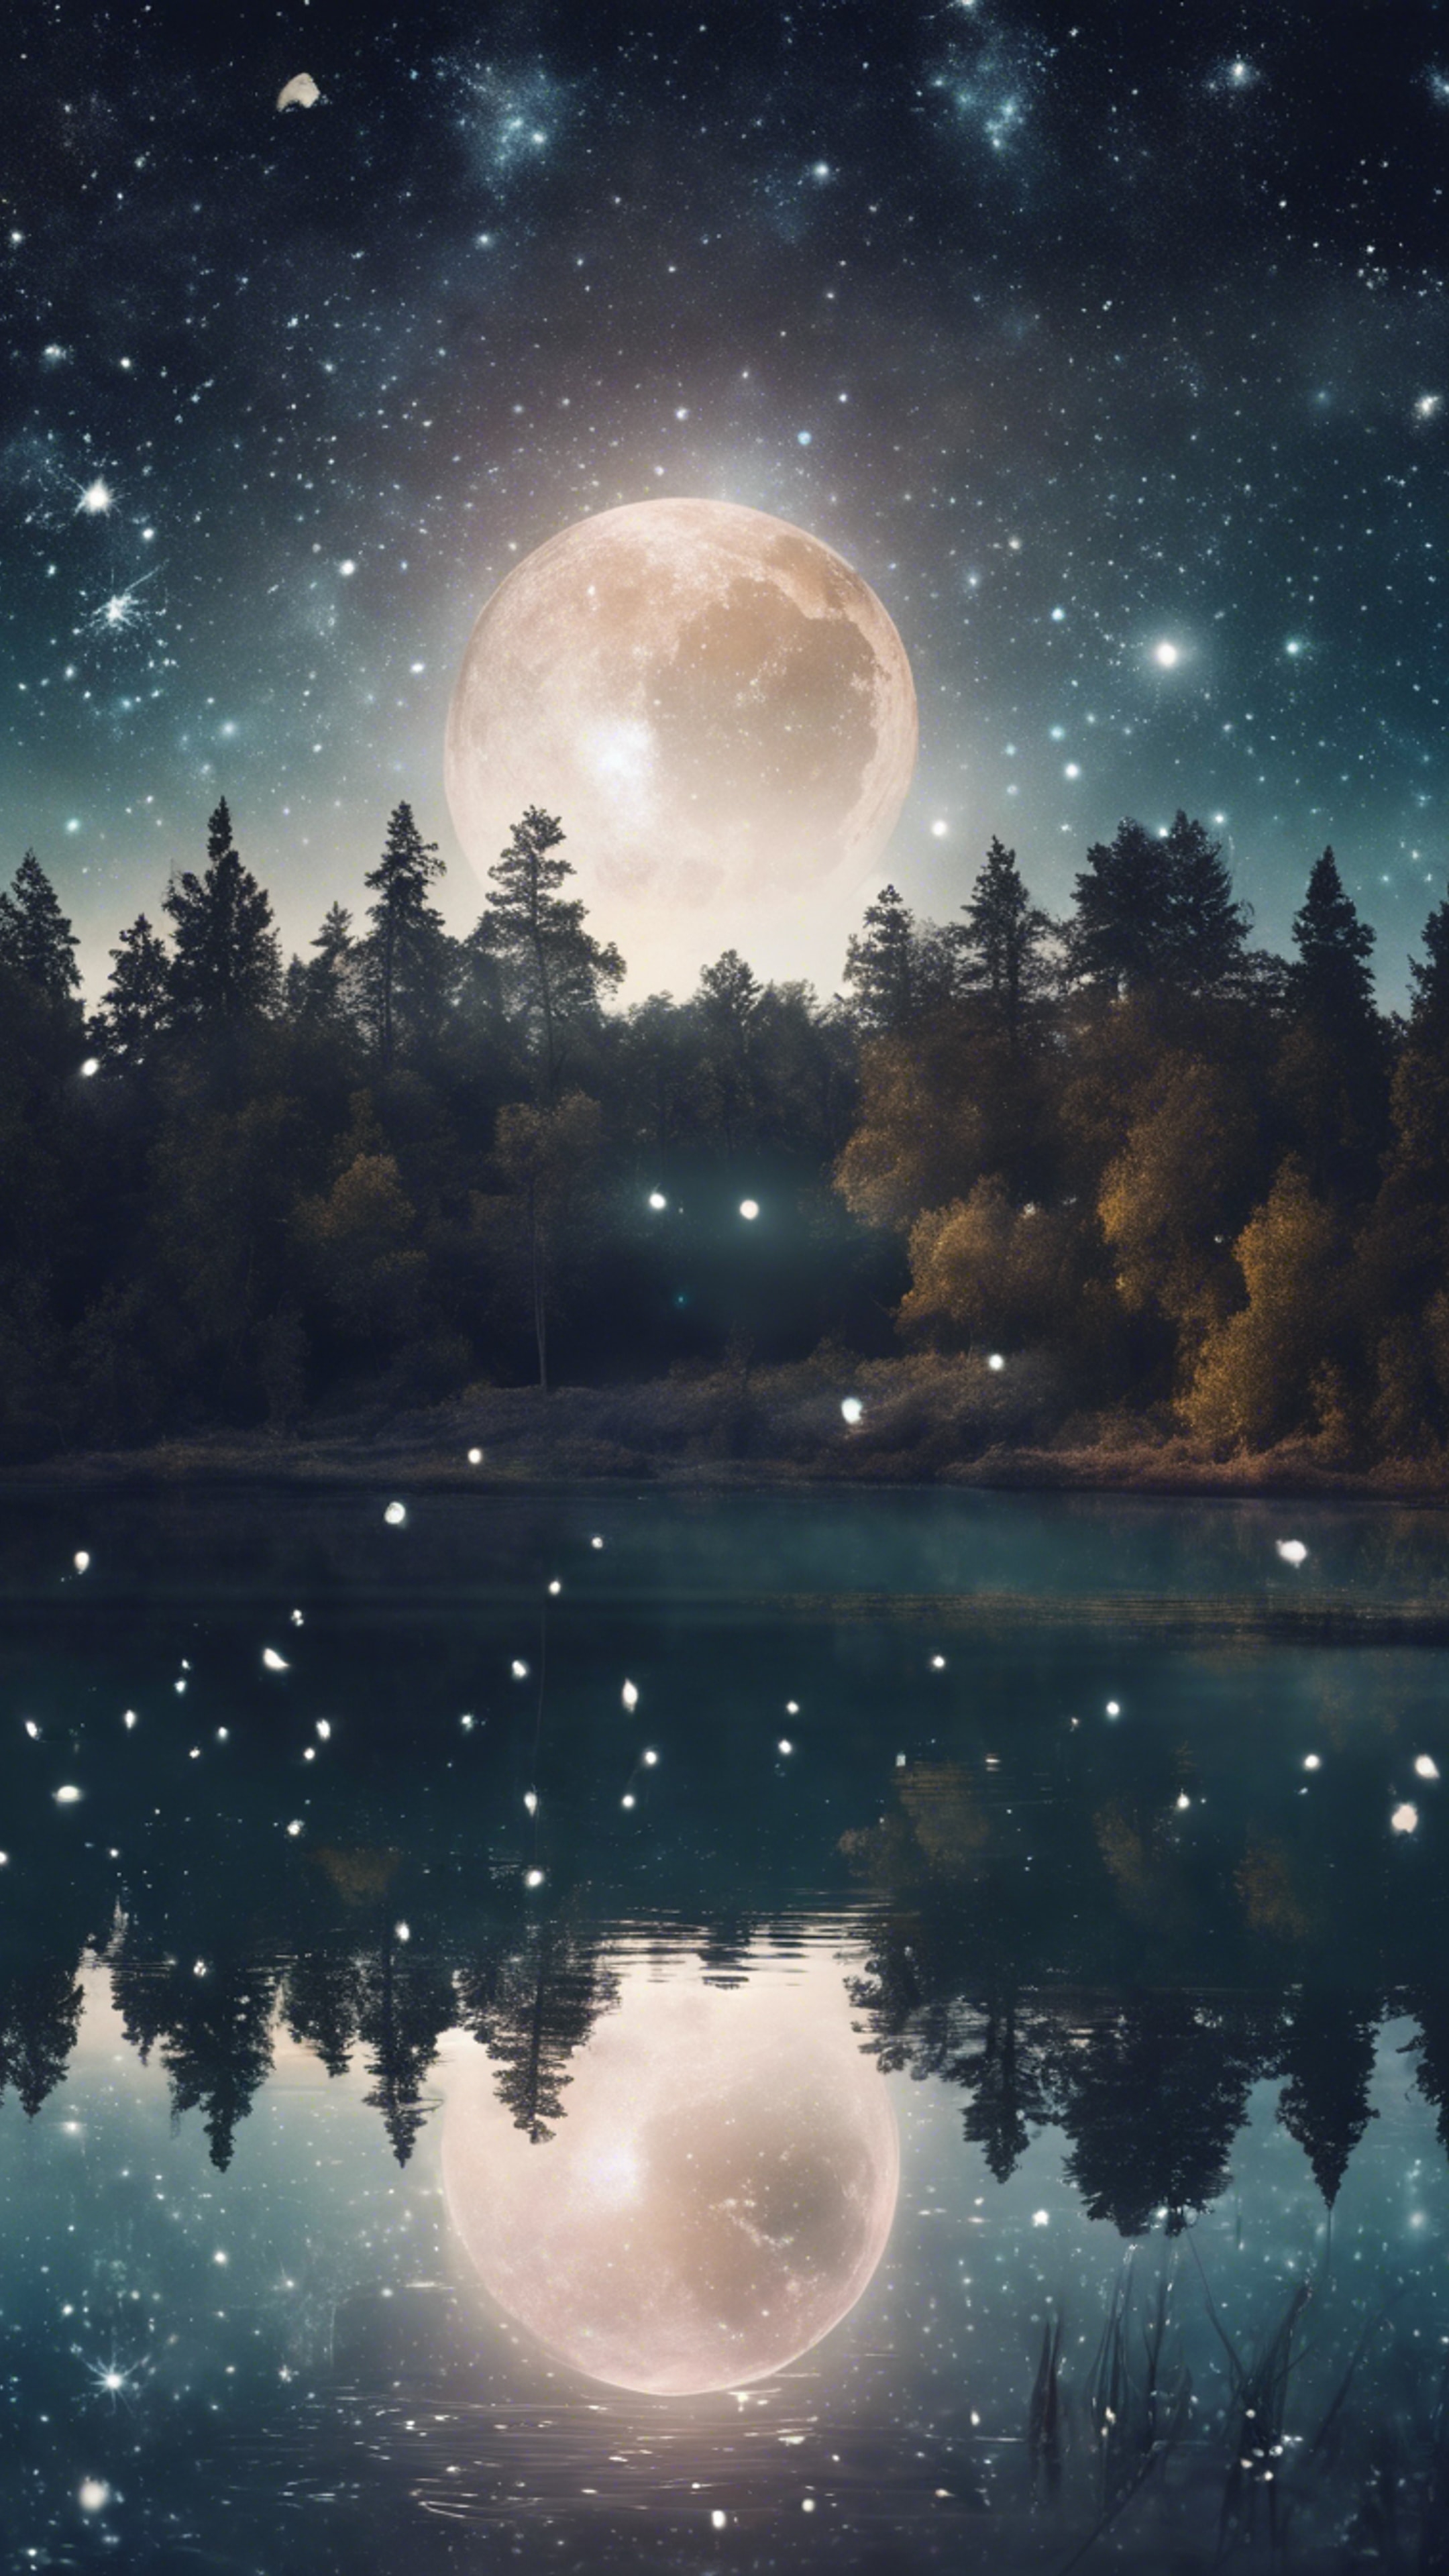 A mystical night sky over a tranquil lake, filled with sparkling constellations and a magical, translucent moon. کاغذ دیواری[02f115e6e6dc4626b628]